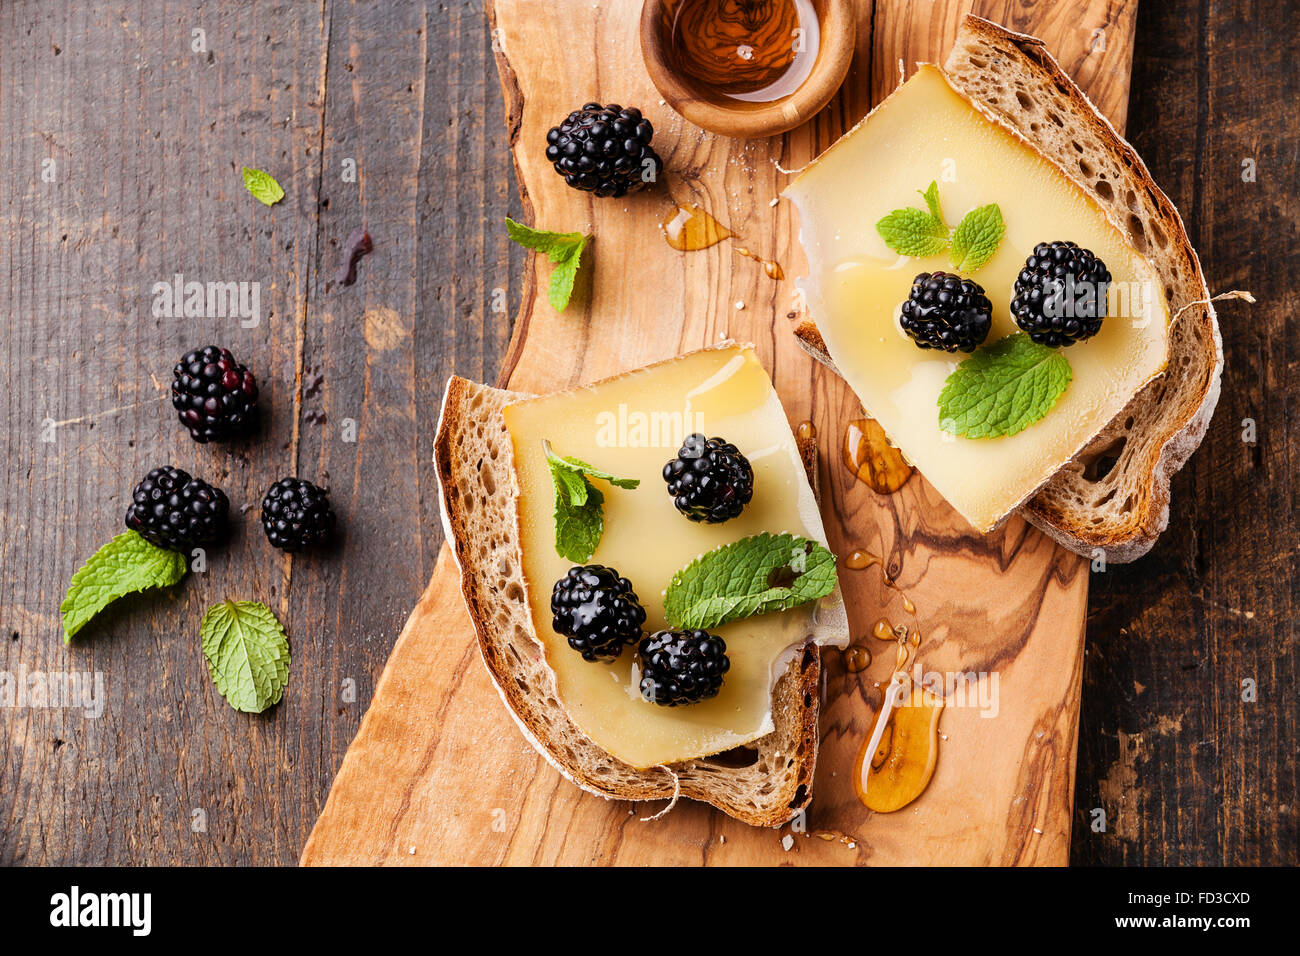 Sandwich with cheese and blackberry on fresh bread on dark wooden background Stock Photo